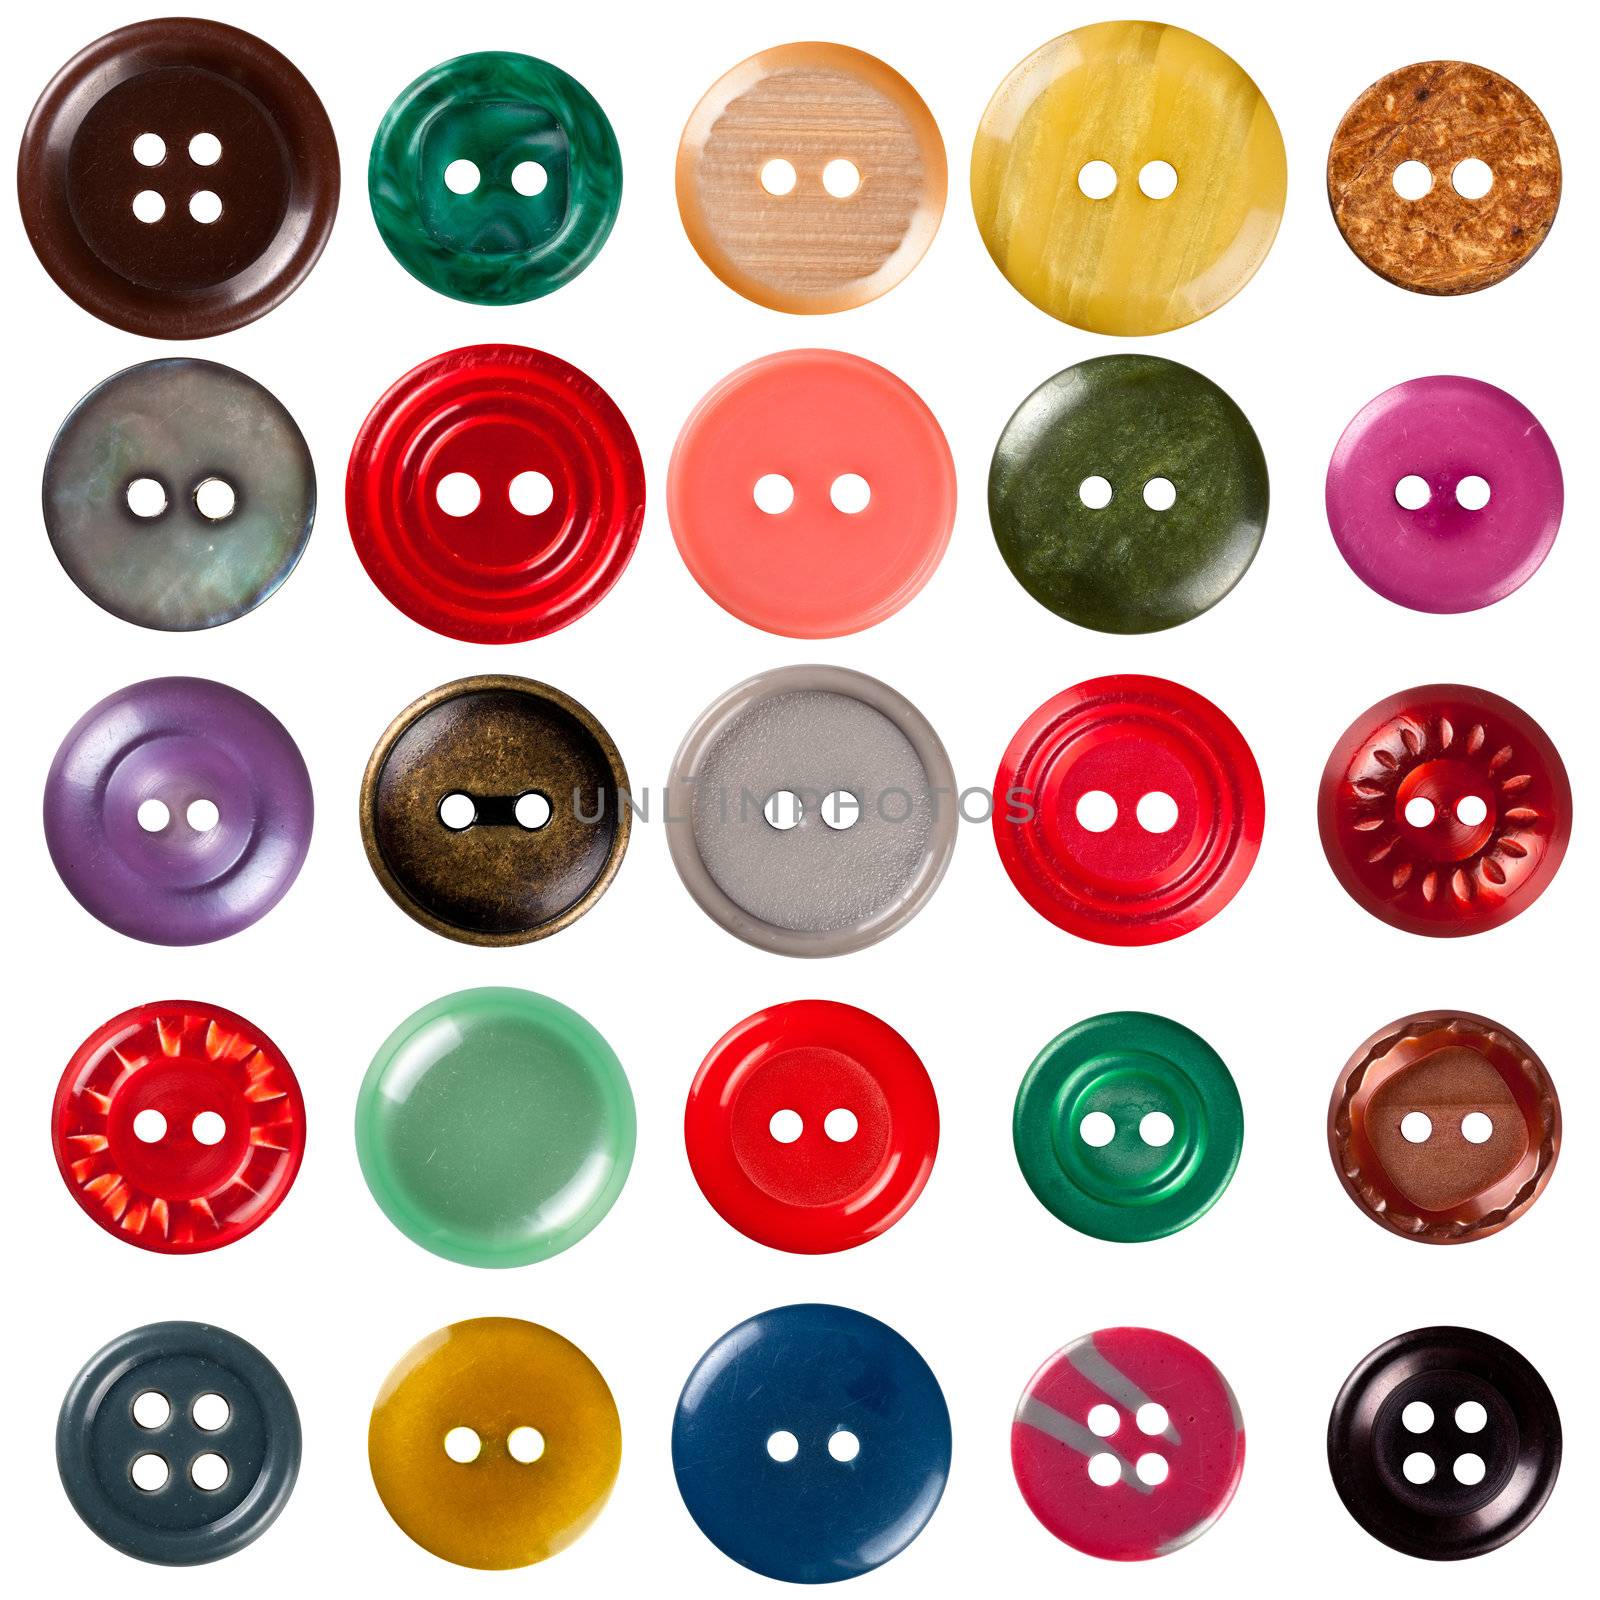 Sewing buttons collection isolated on white background. Each one is shot separately